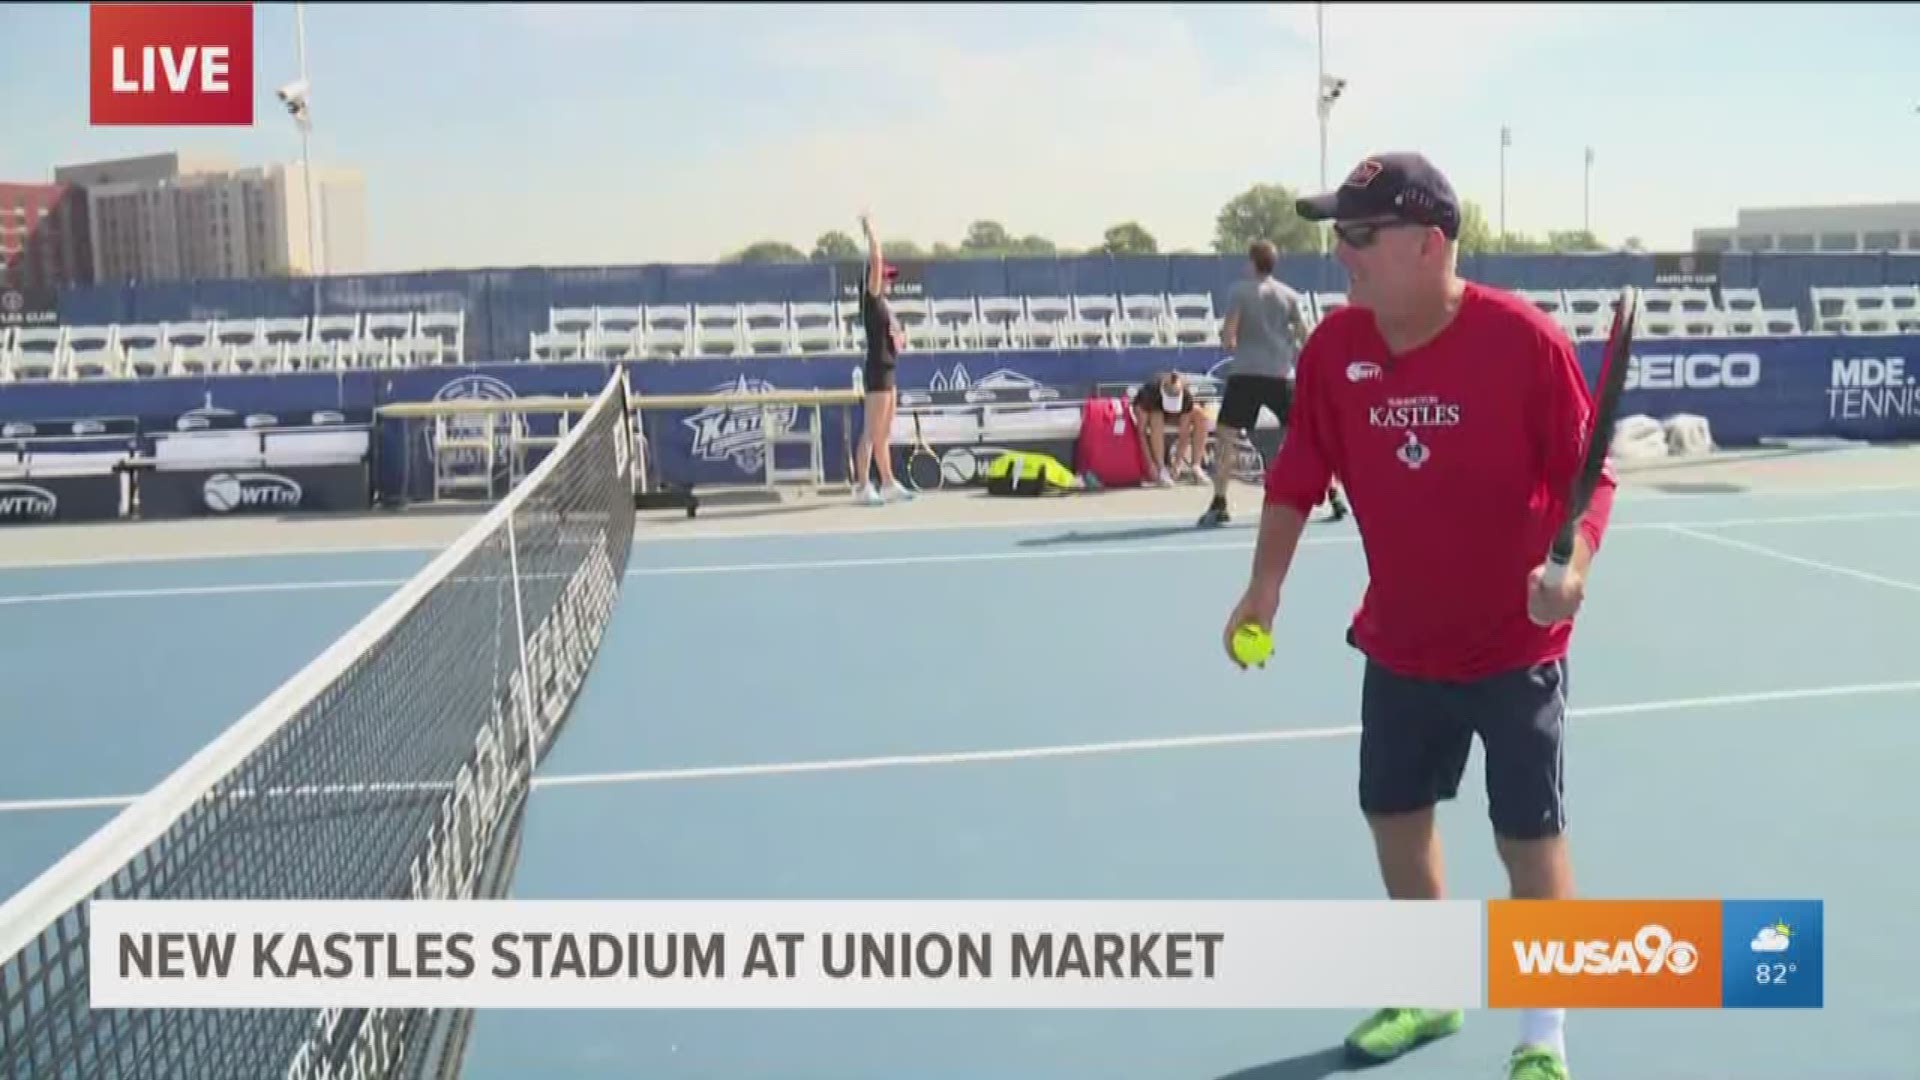 Andi plays a friendly match with Coach Macpherson at the new Washington Kastles stadium.